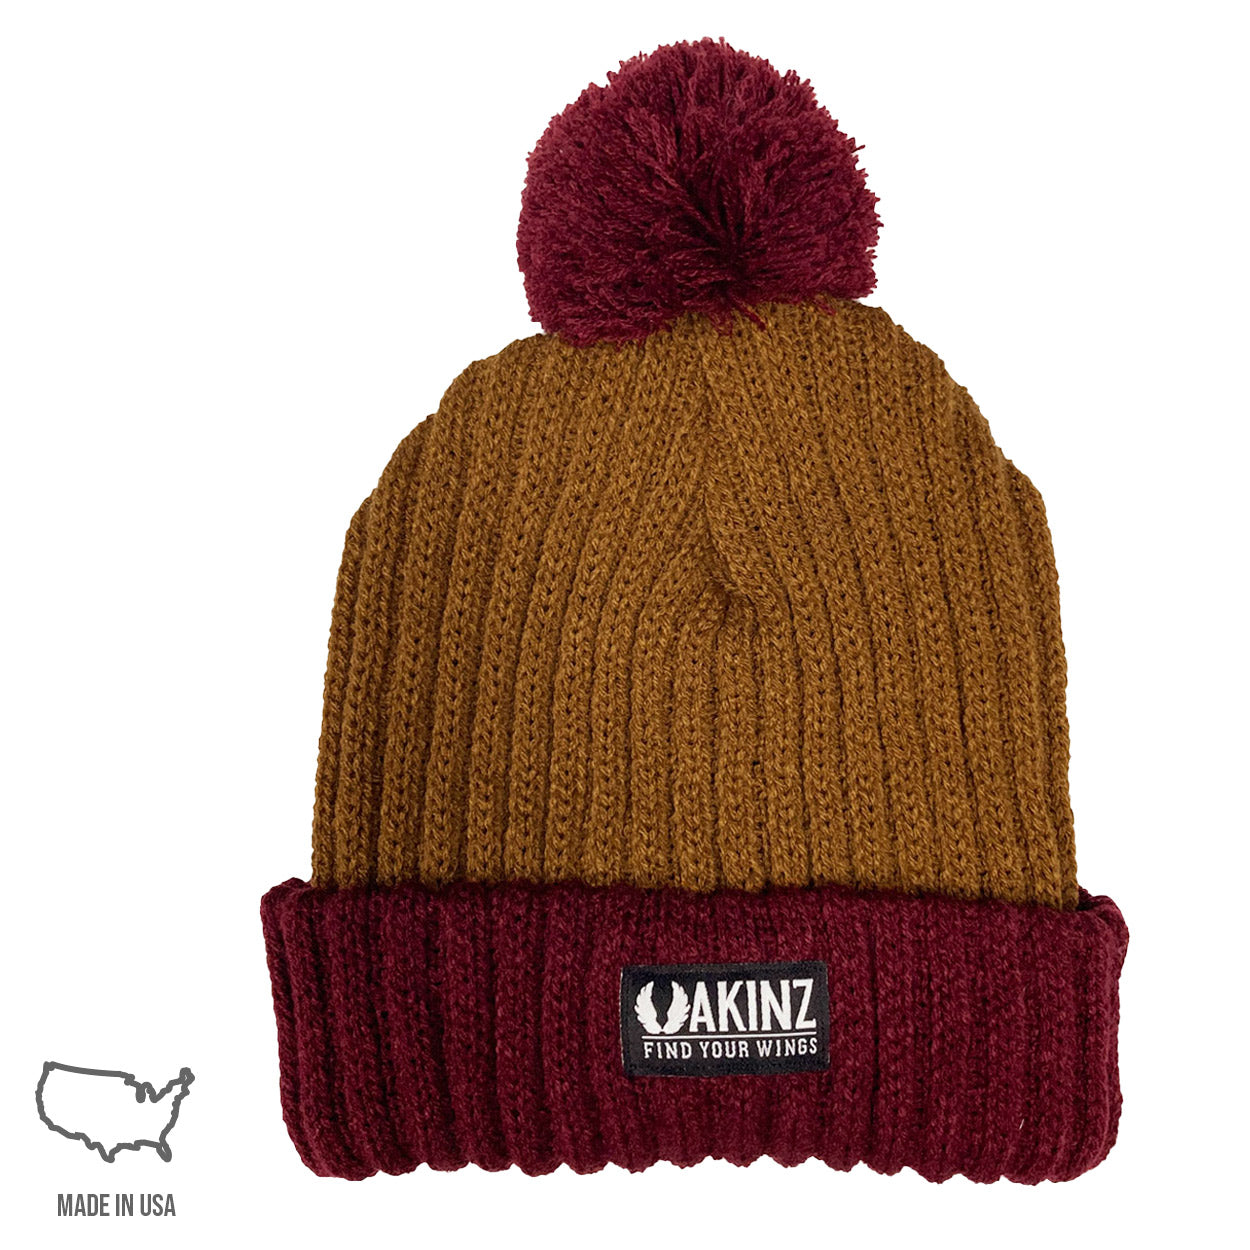 Find Your Wings Pom Beanie